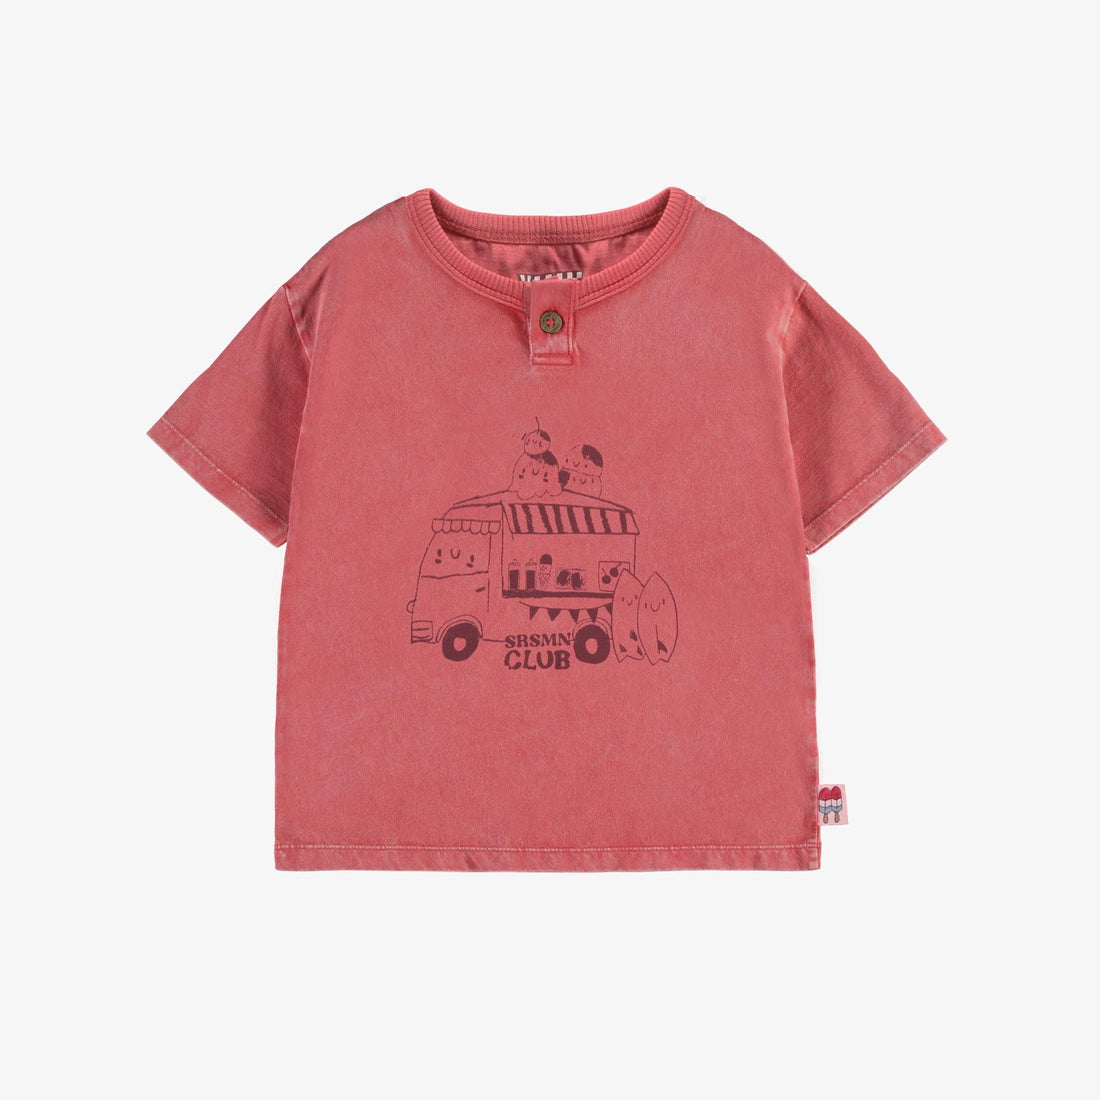 RED SHORT-SLEEVED T-SHIRT WITH AN ILLUSTRATION IN COTTON, BABY